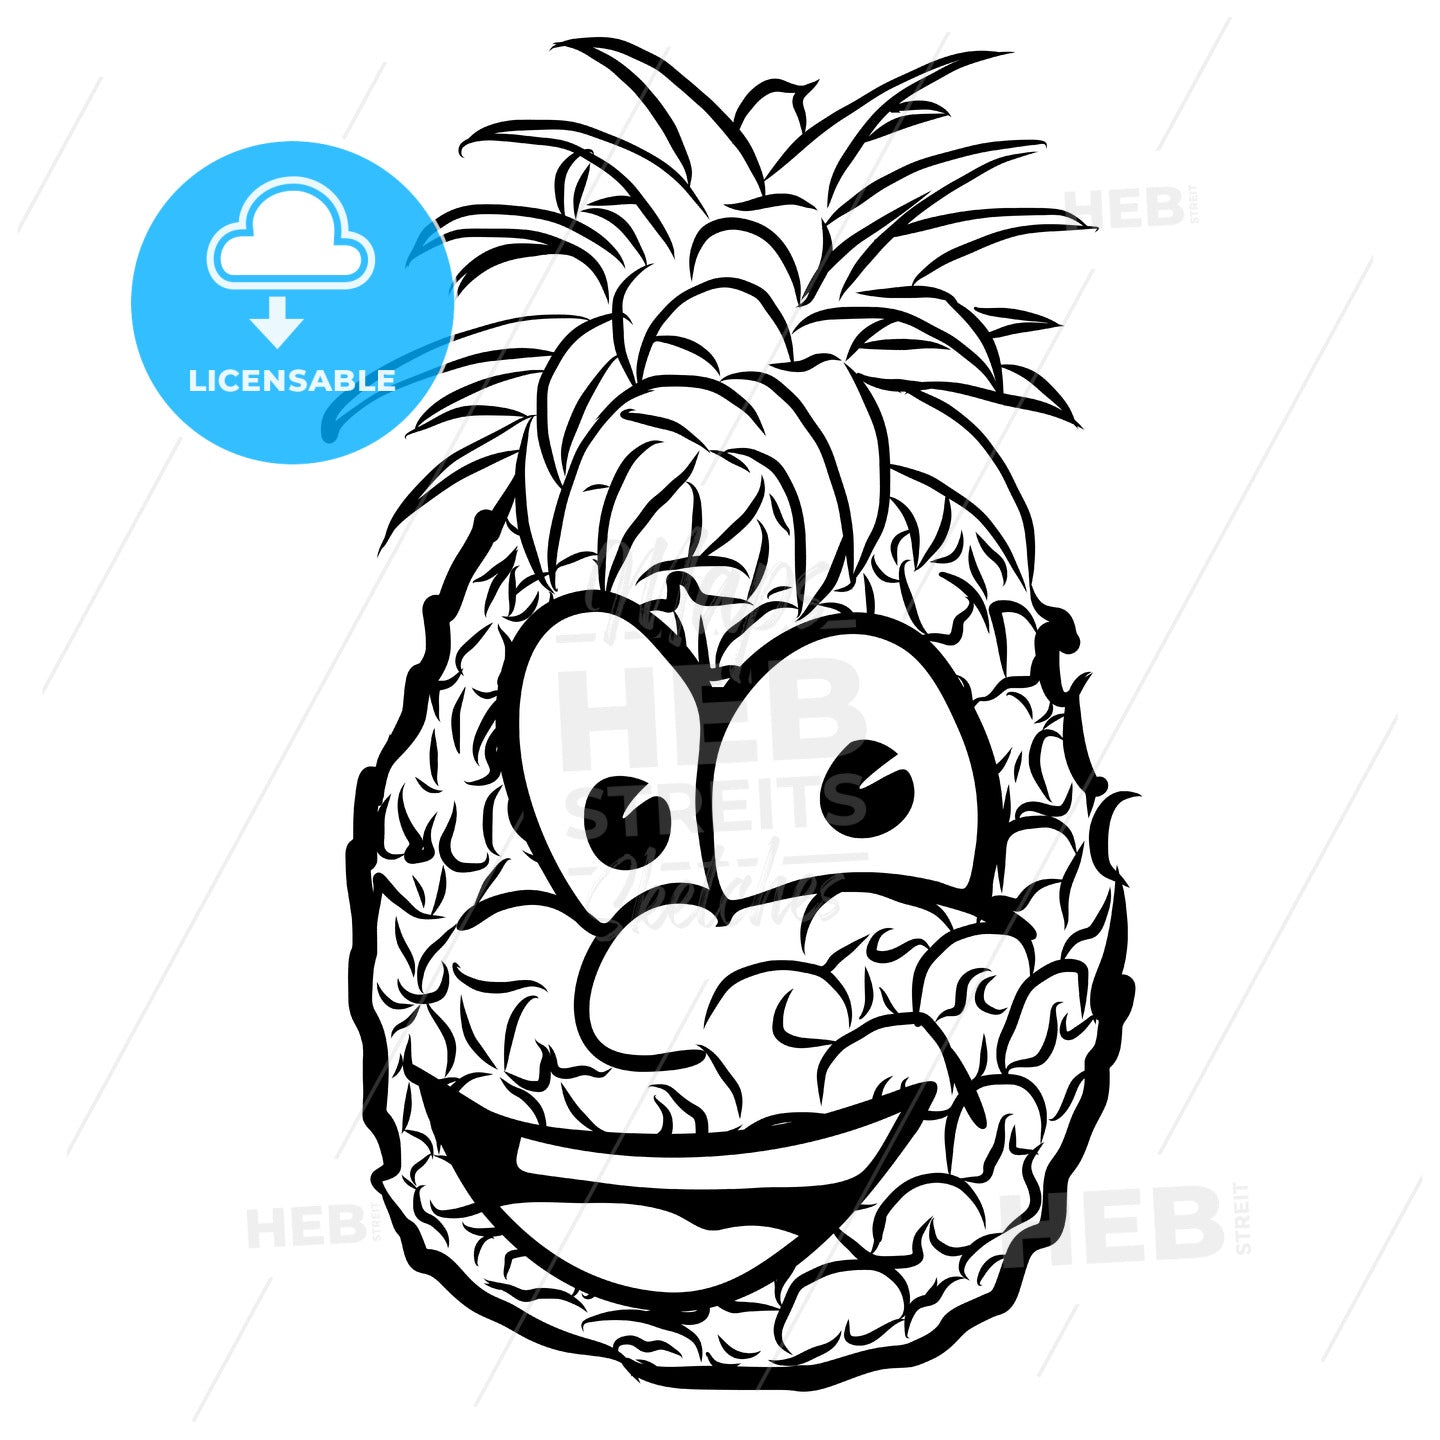 Laughing Pineapple Vector Illustration Fruit – instant download